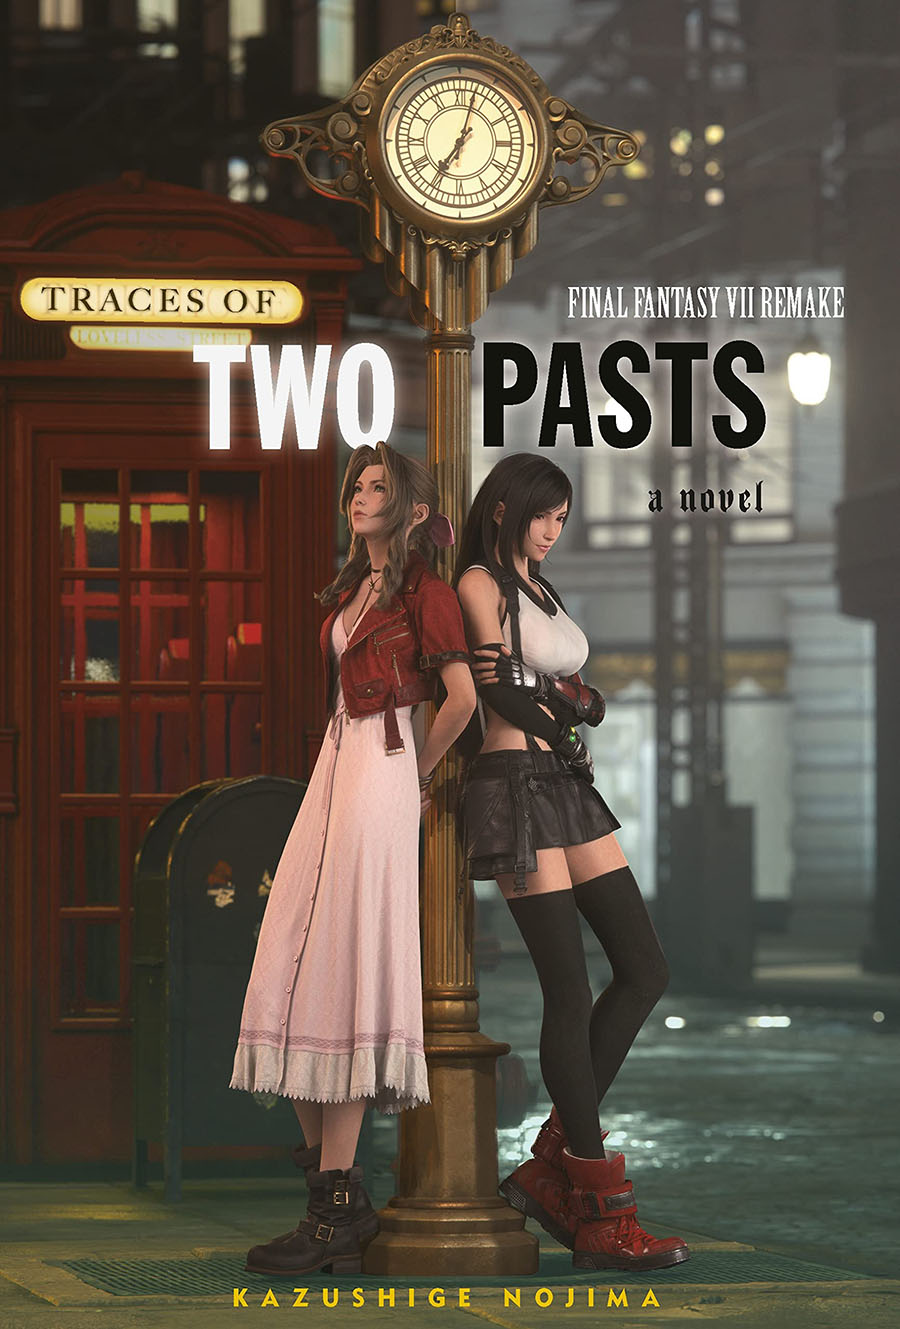 Final Fantasy VII Remake Traces Of Two Pasts Novel HC